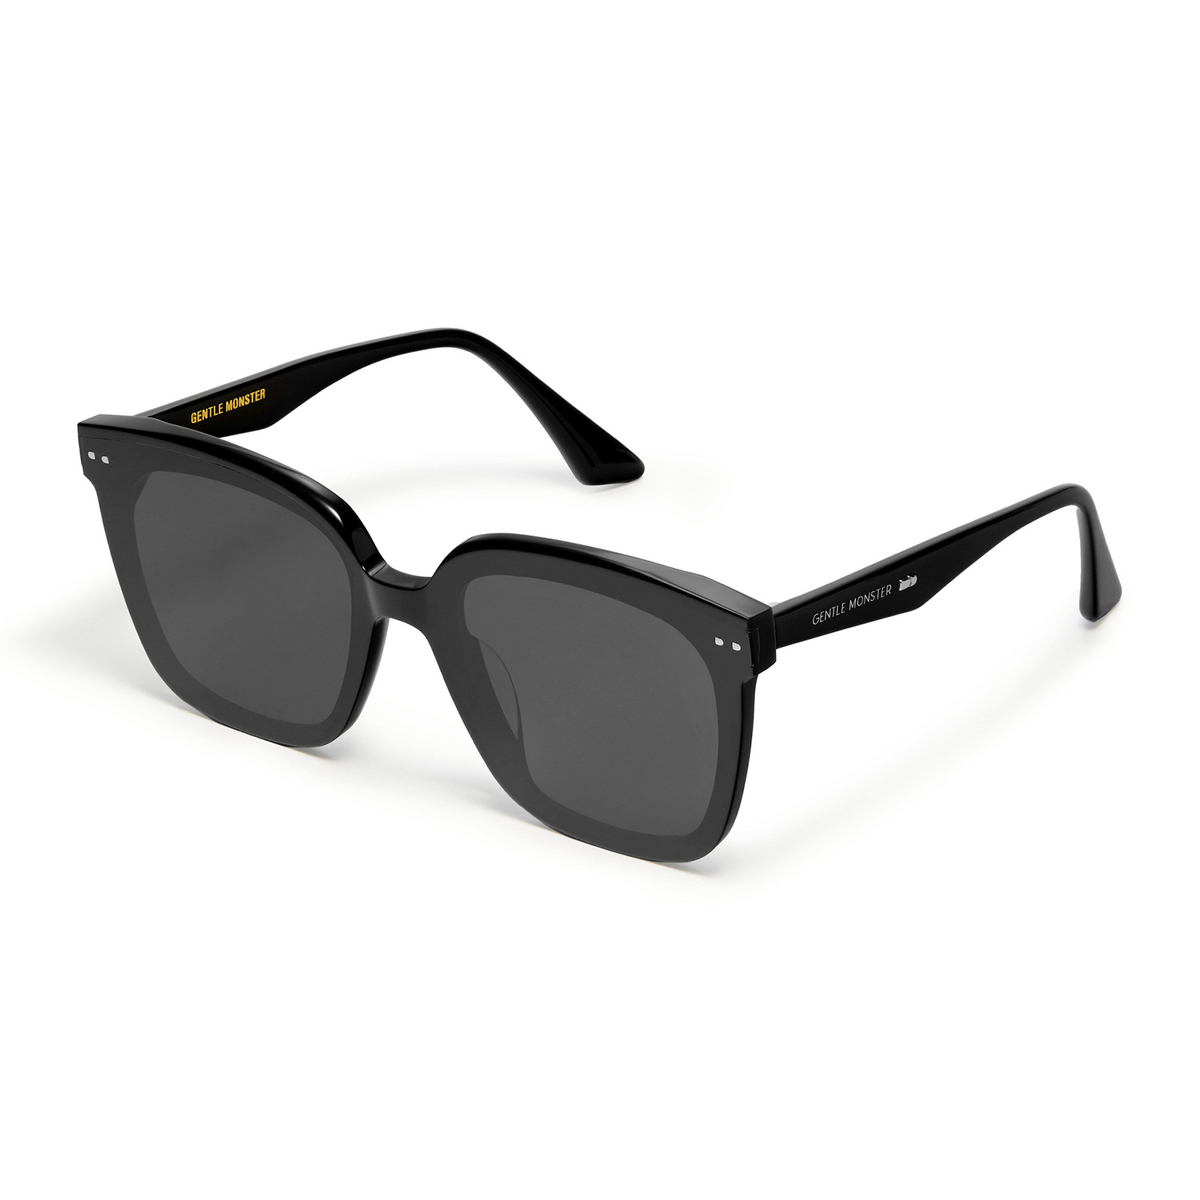 Gentle Monster® Square Sunglasses: Lo Cell color Black 01 - three-quarters view.